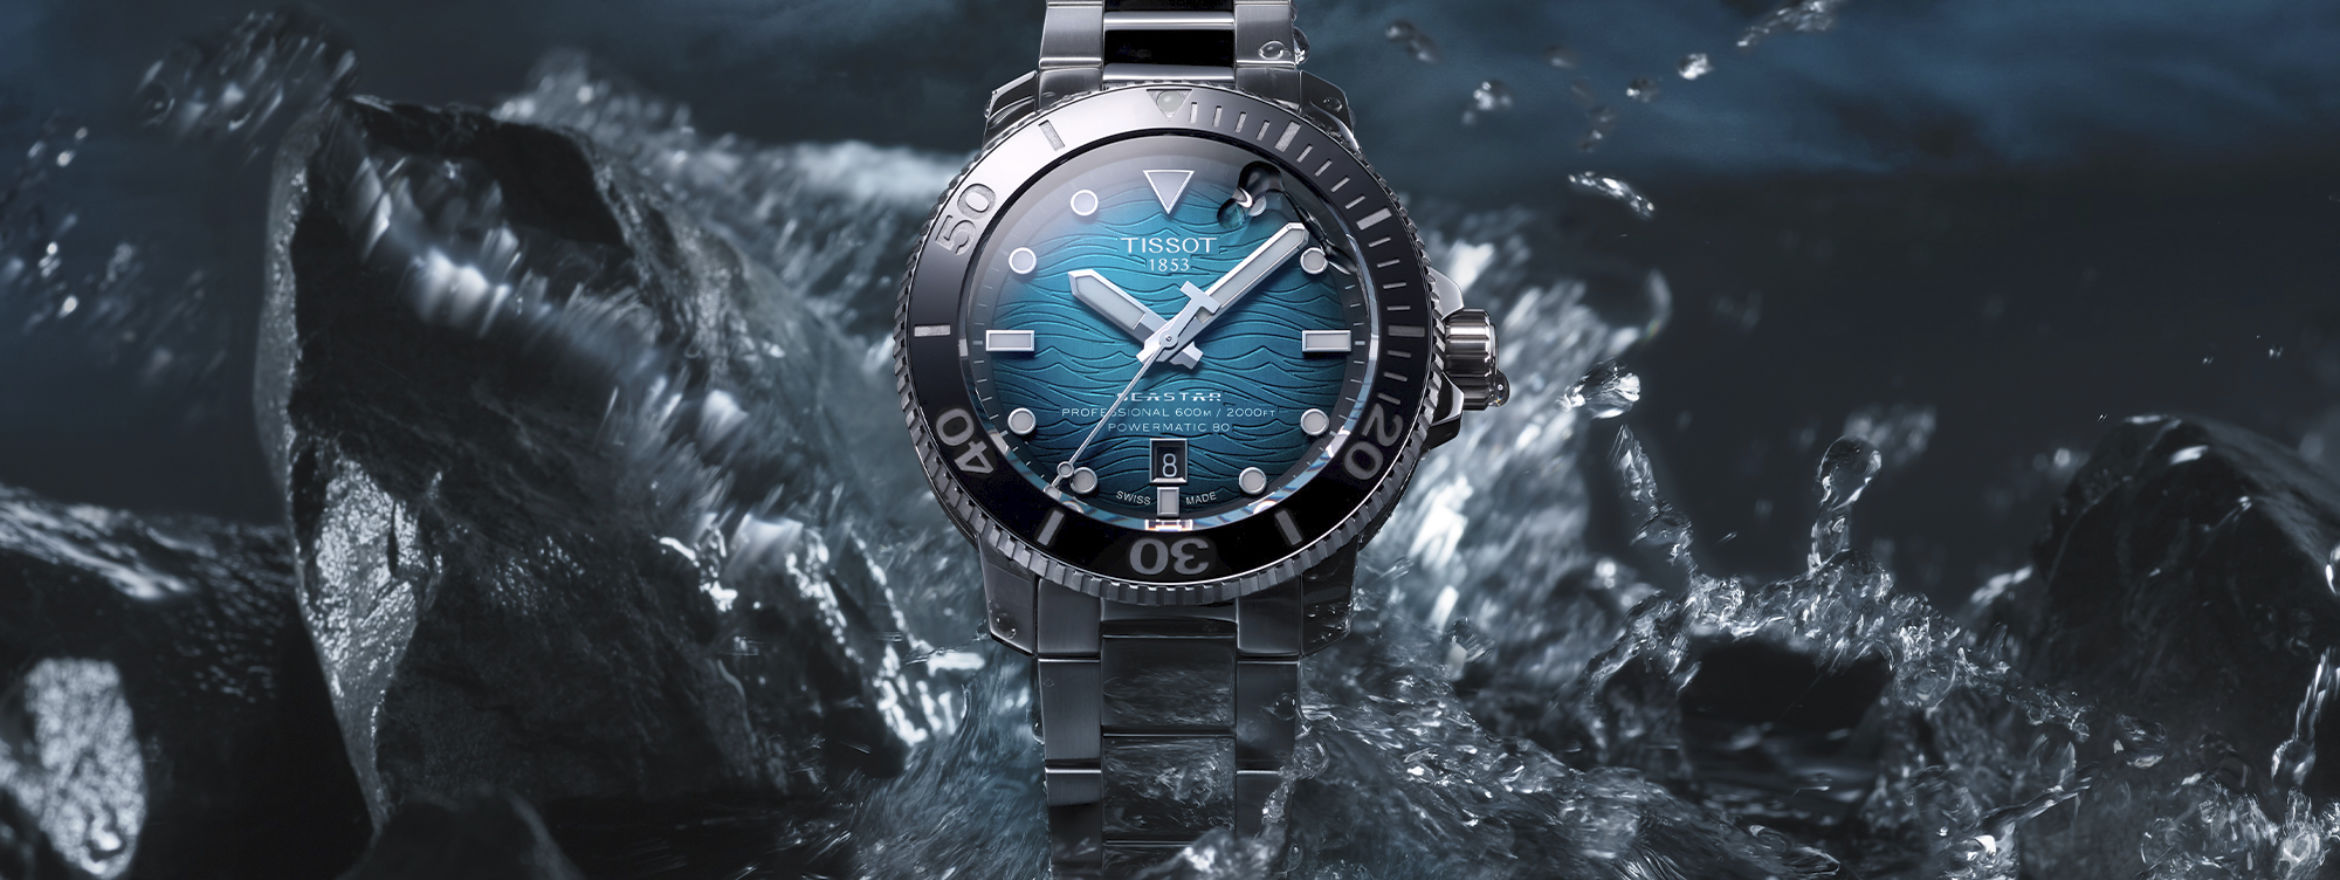 Tissot Launches the Seastar 2000 Professional